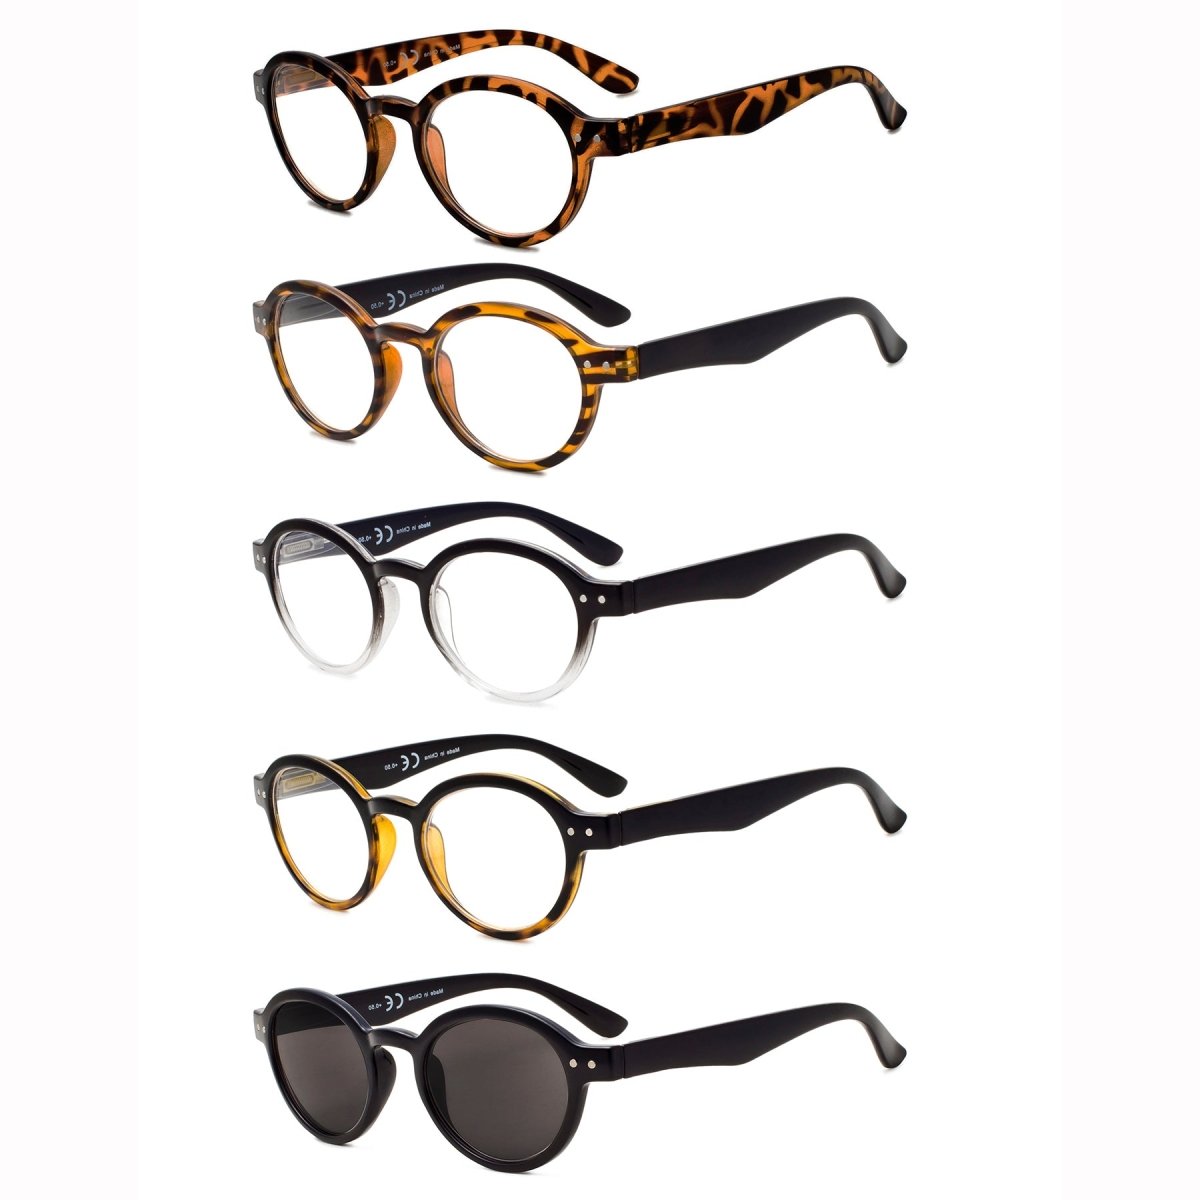 http://www.eyekeeper.com/cdn/shop/products/5-pack-retro-round-reading-glasses-include-sunglasses-r070-475014.jpg?v=1699531712